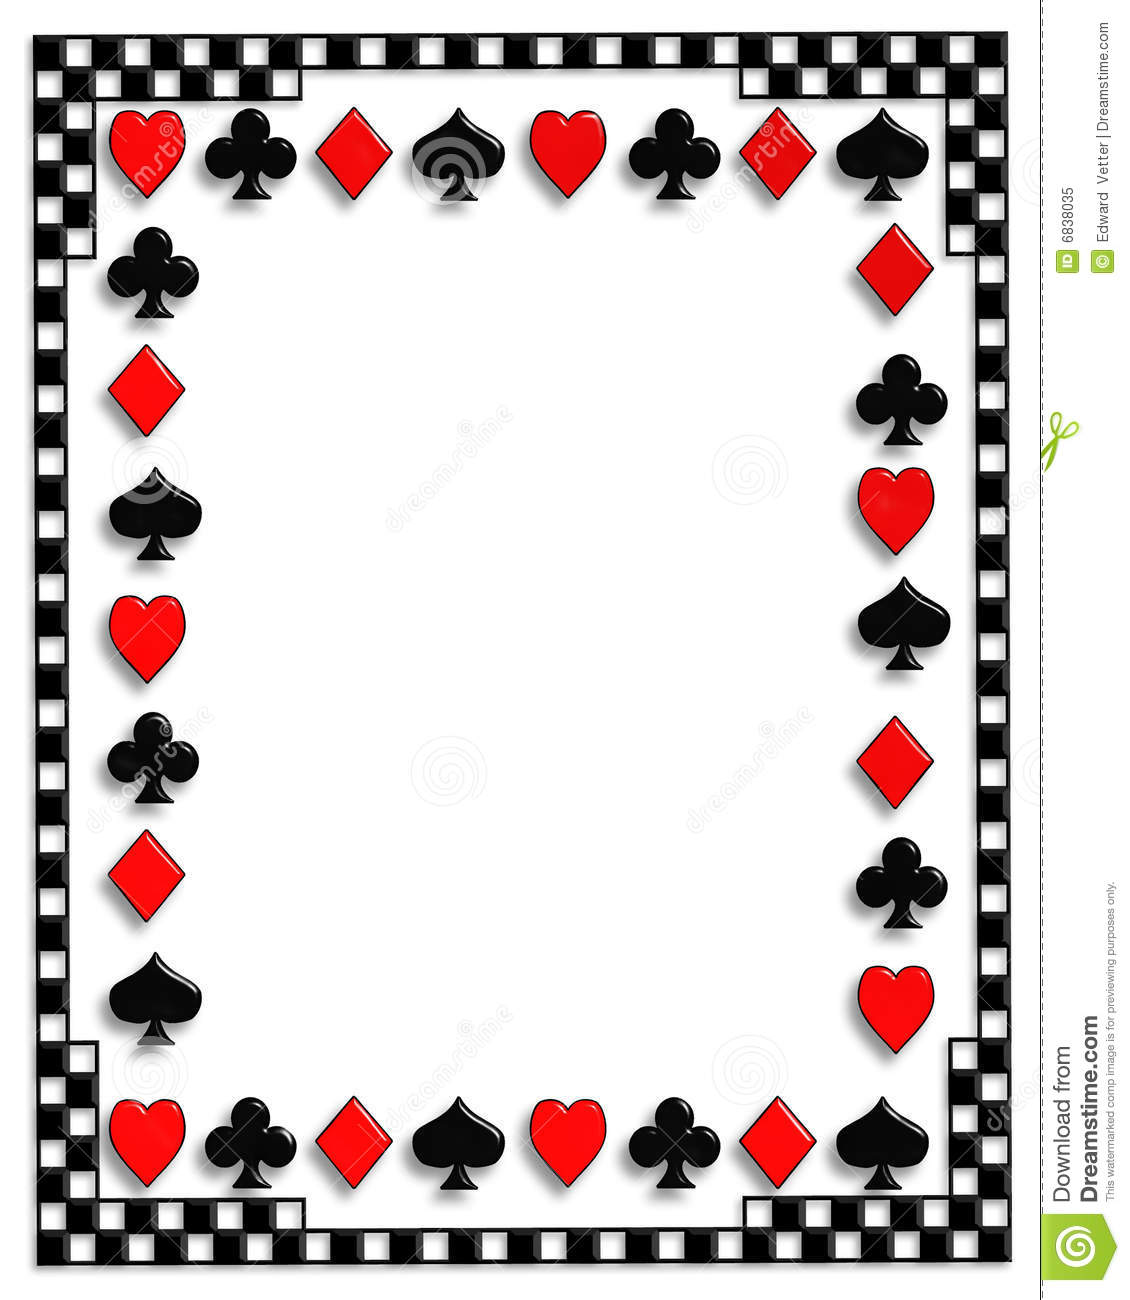 Playing Cards Border Poker Suits Royalty Free Stock Photo   Image